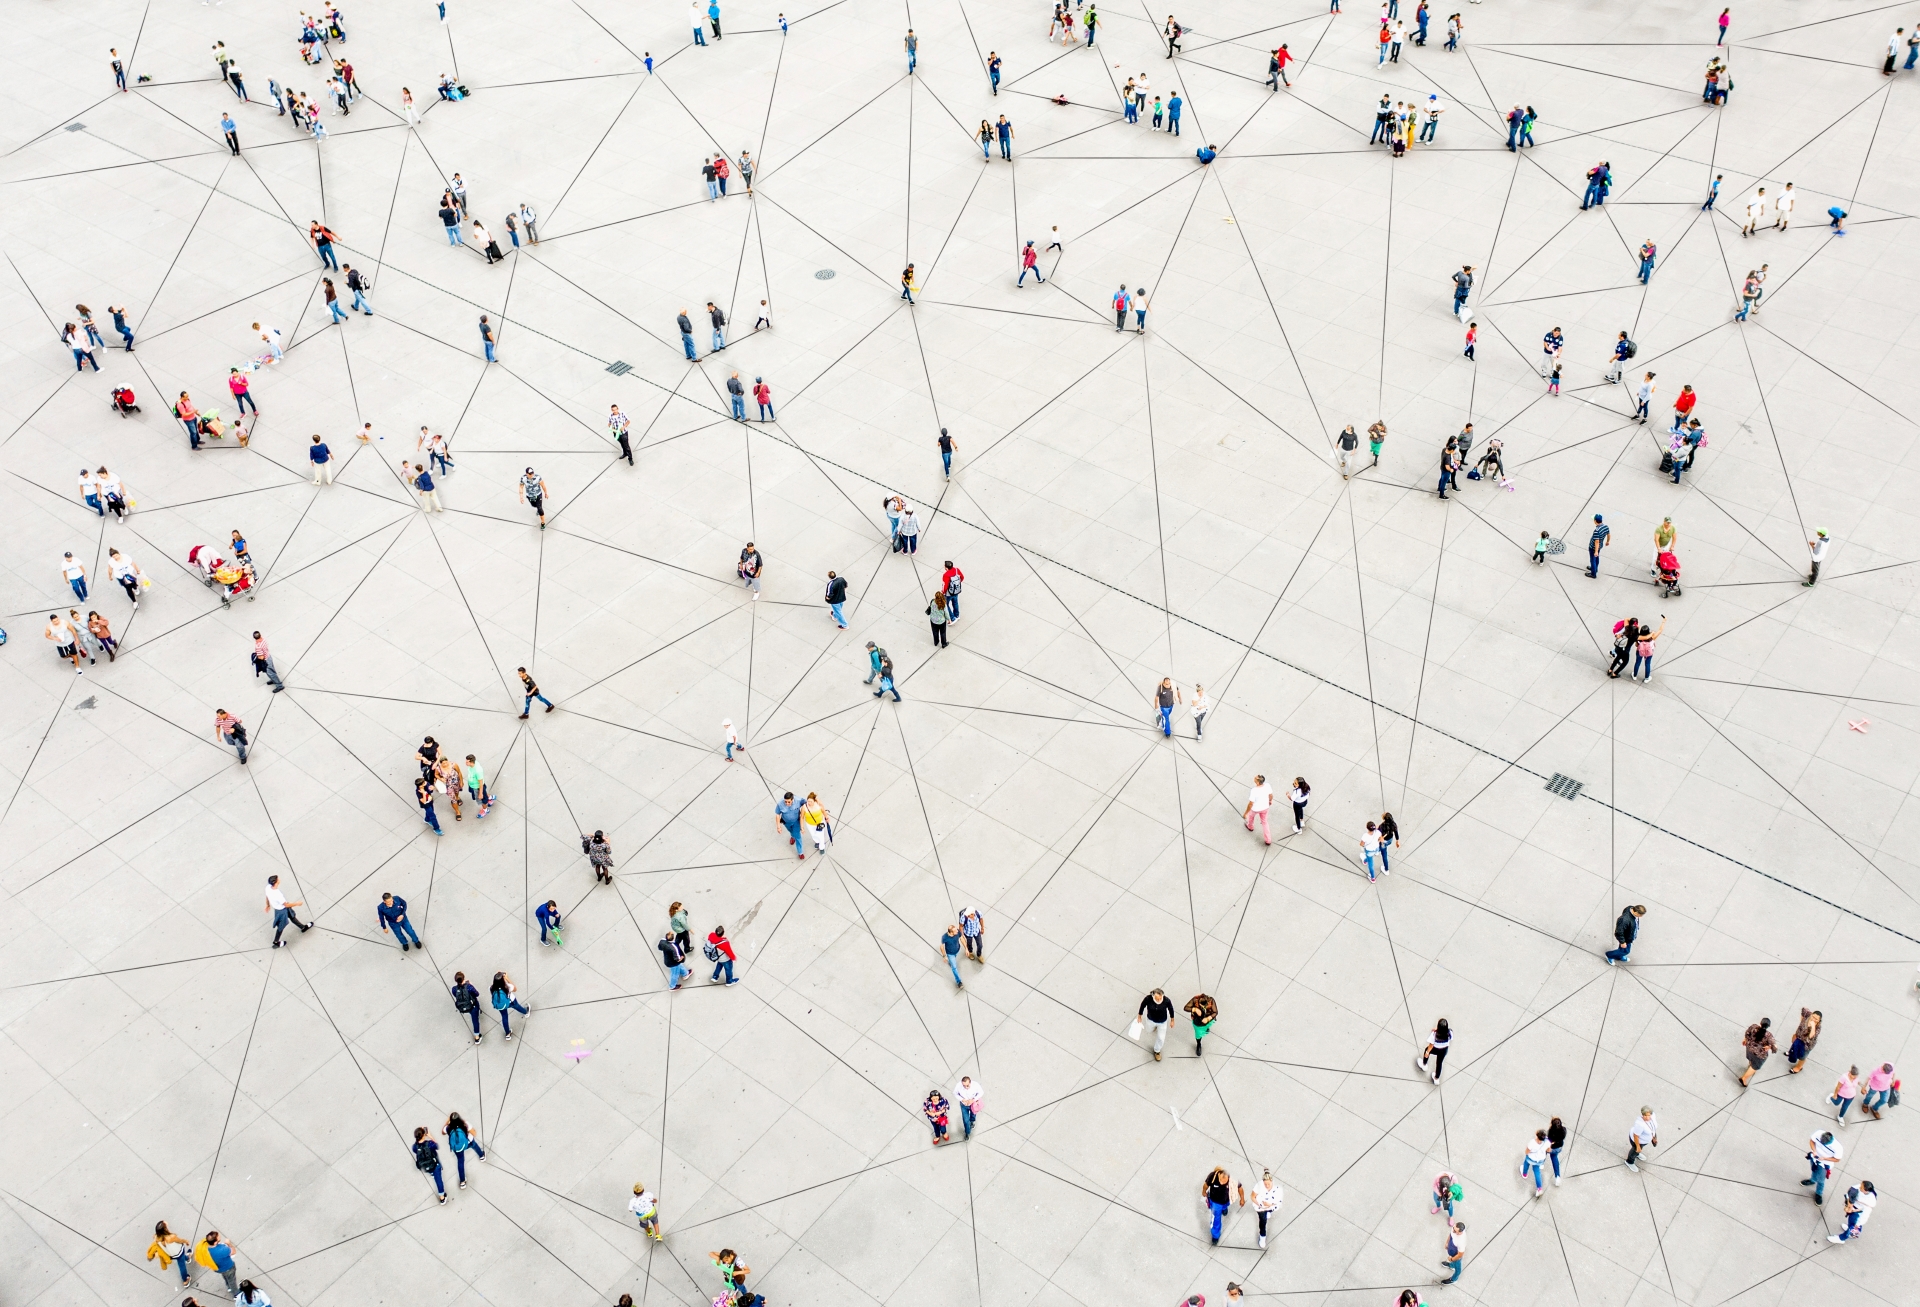 iStock-1180187740 - aerial people connected by lines v2 1920